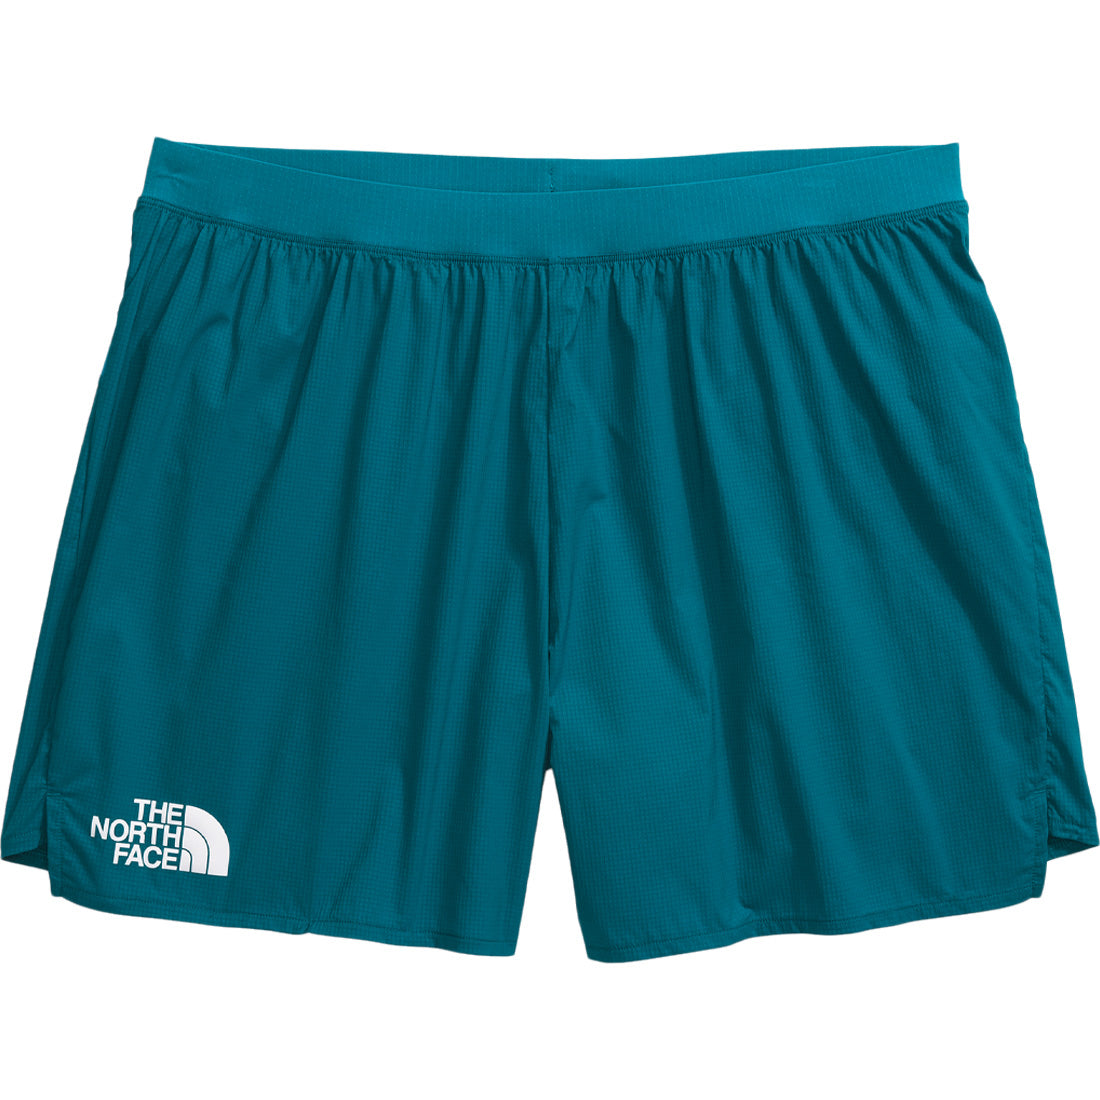 The North Face Summit Series Pacesetter Short 5" -Men's